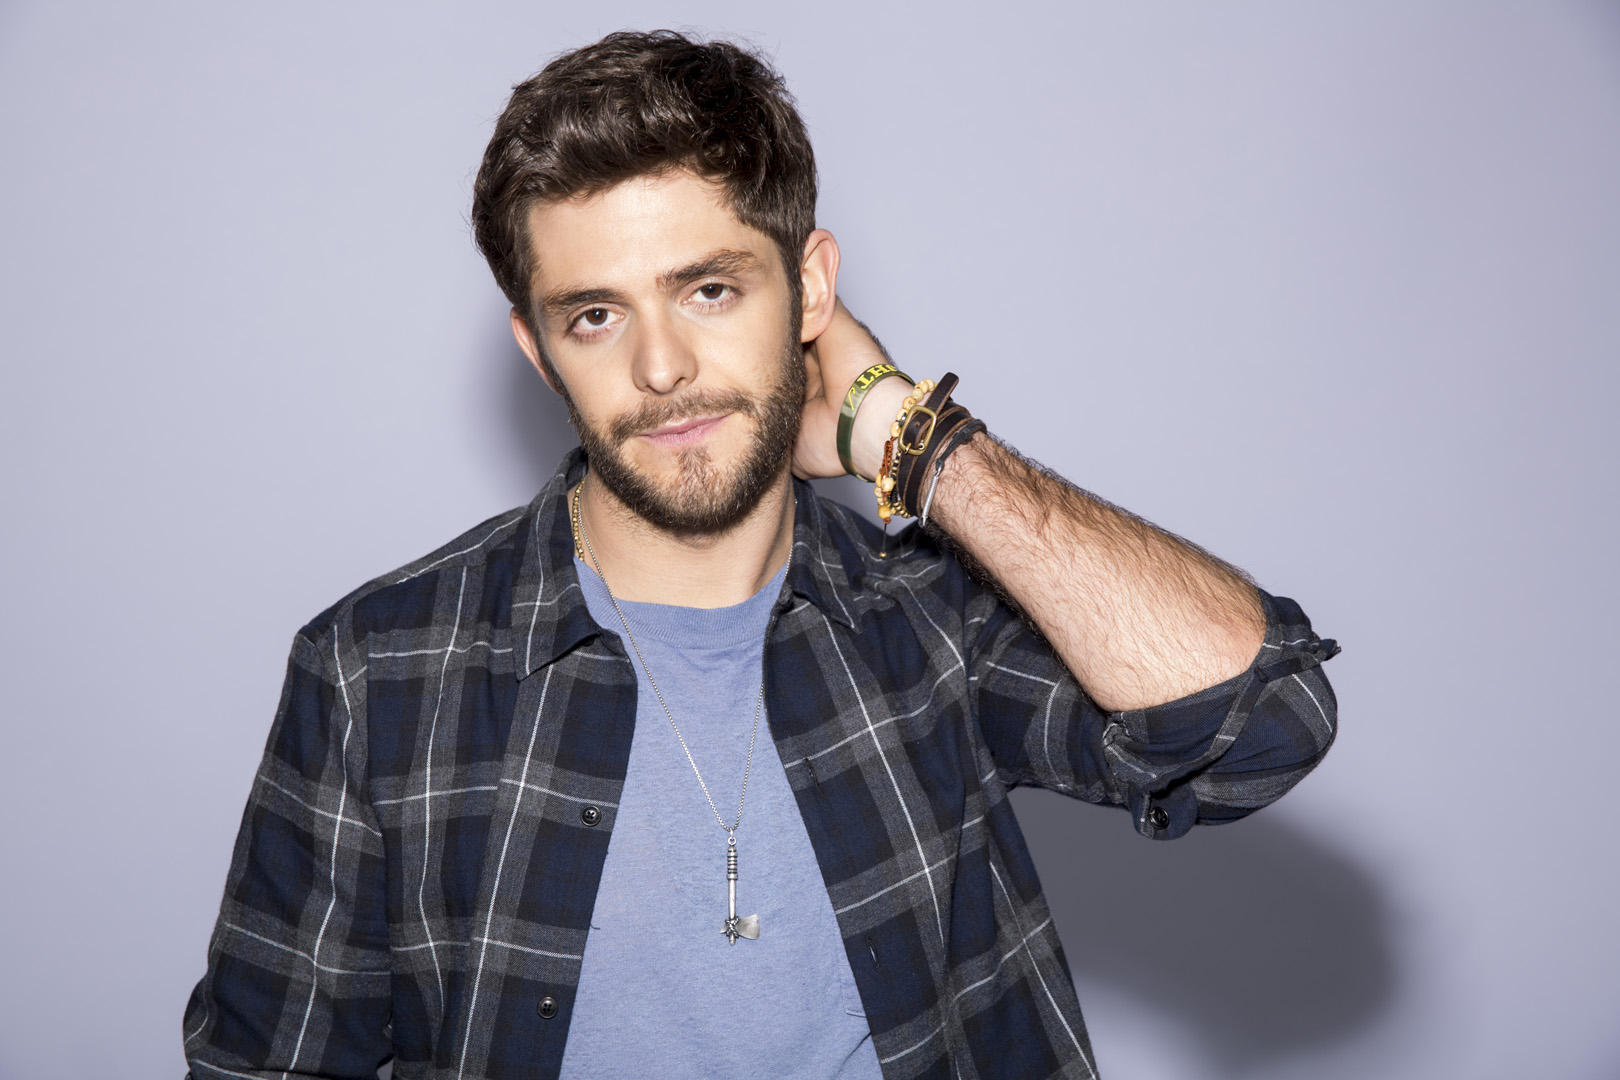 Thomas Rhett, nominated for New Male Vocalist Of The Year.